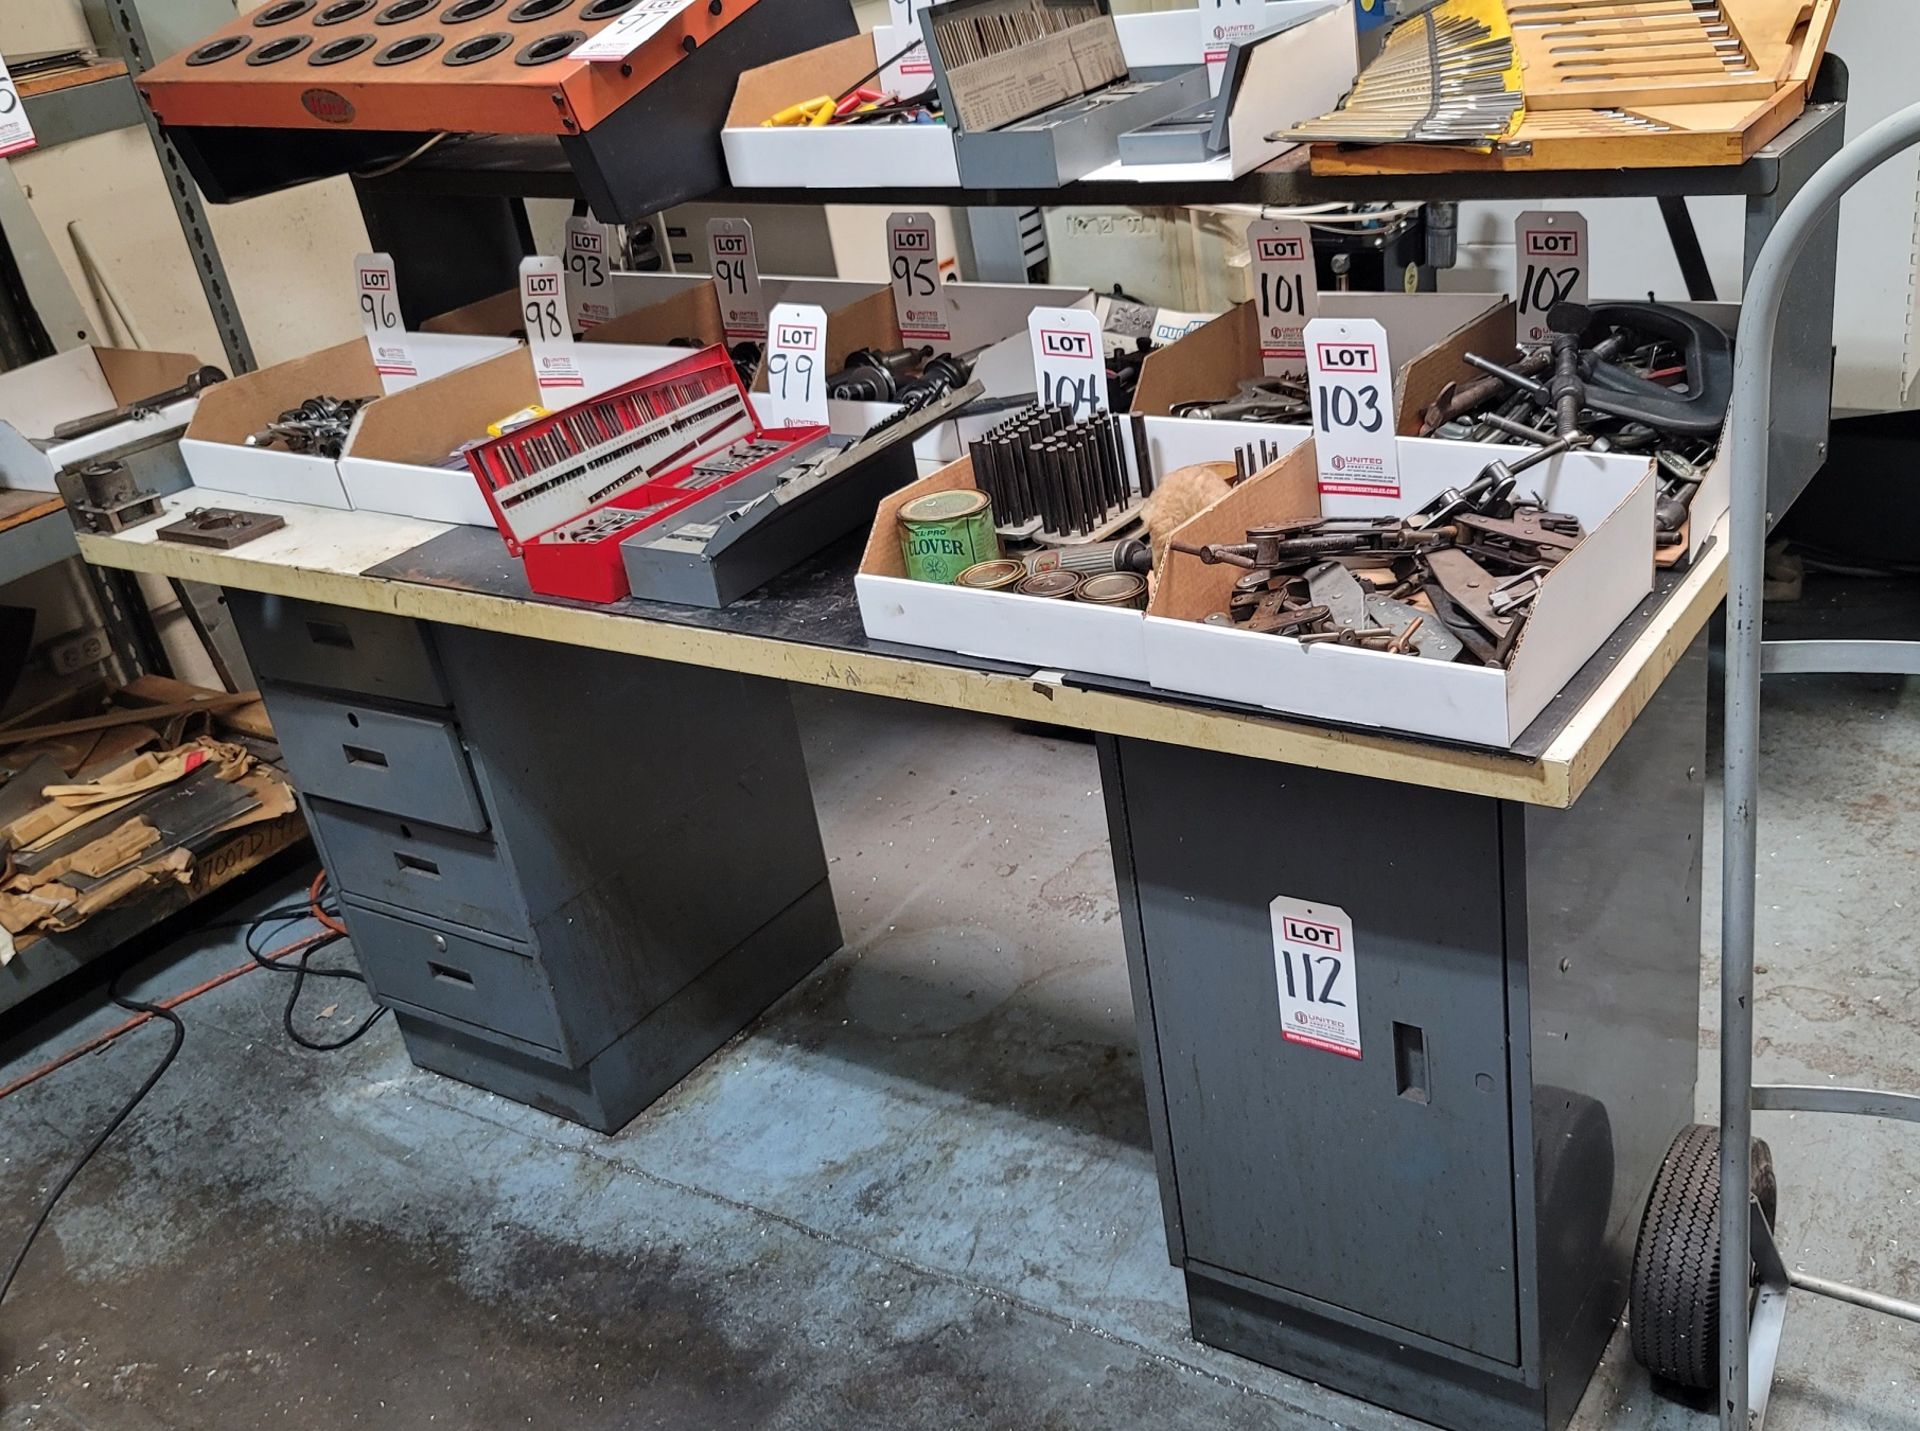 WORKBENCH, 6' X 30" WOOD TOP, W/ BACK SHELF, DRAWER BANK AND SINGLE DOOR STORAGE, CONTENTS NOT